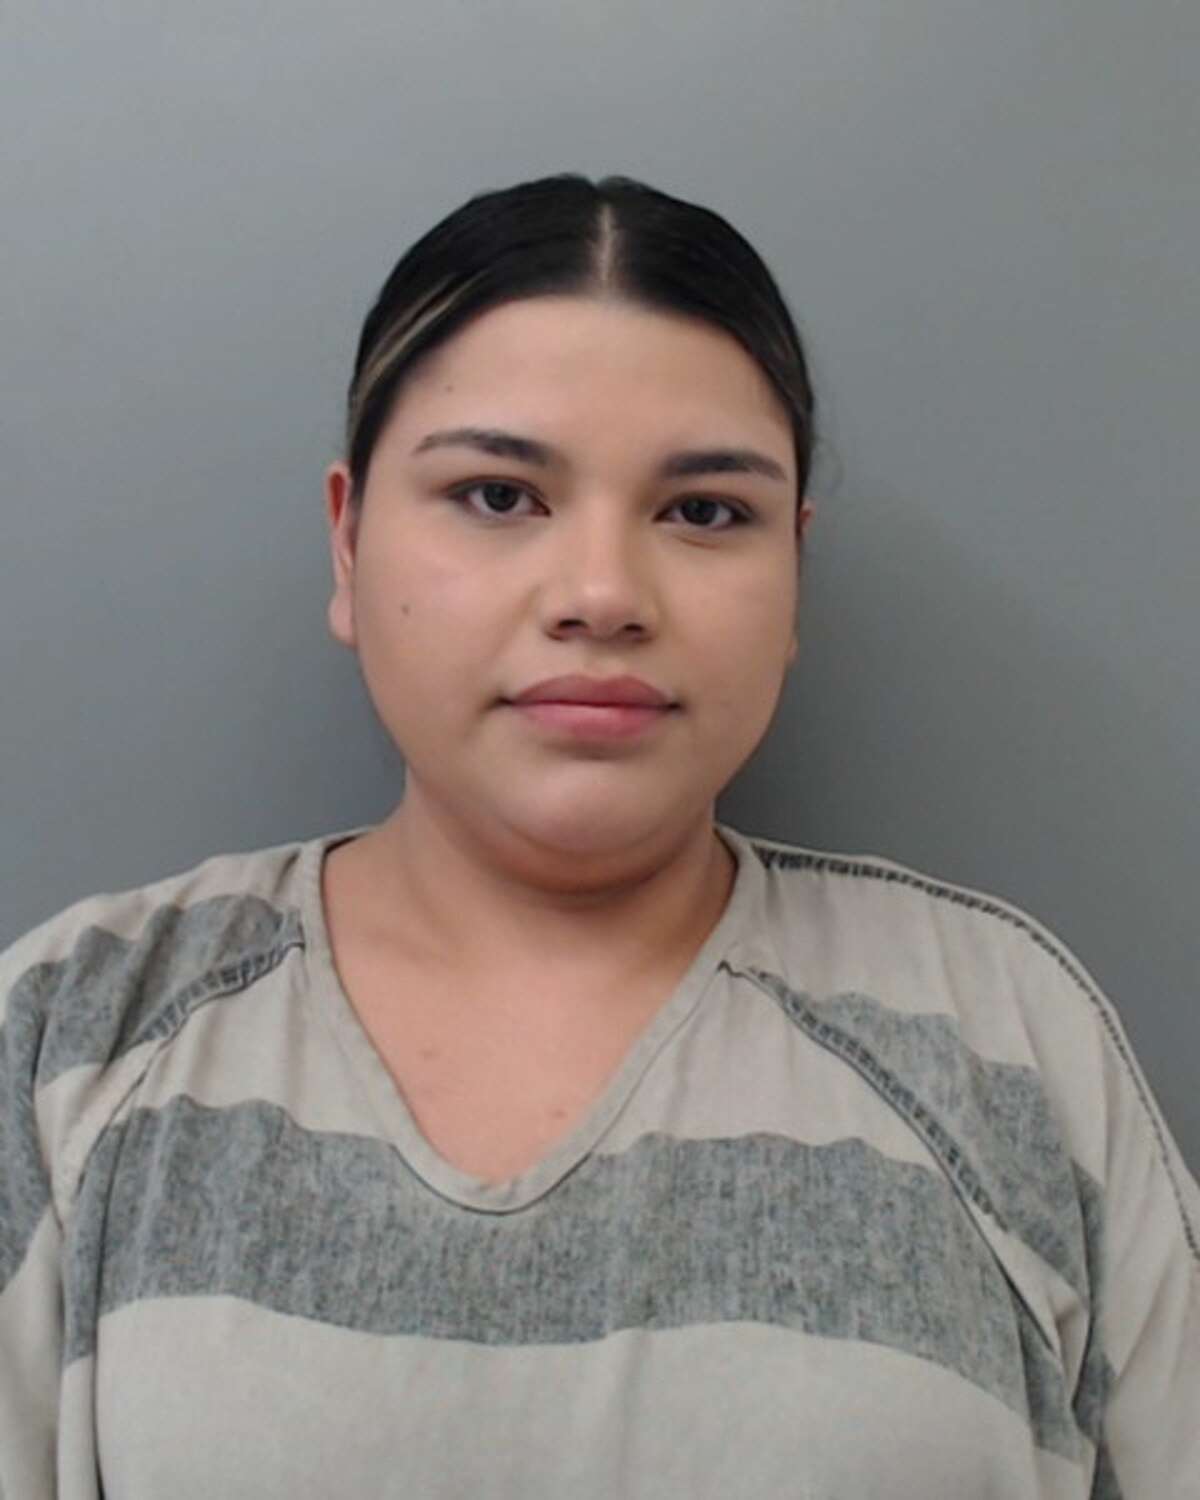 Adriana Arely Vigil, 30, was charged with assault.